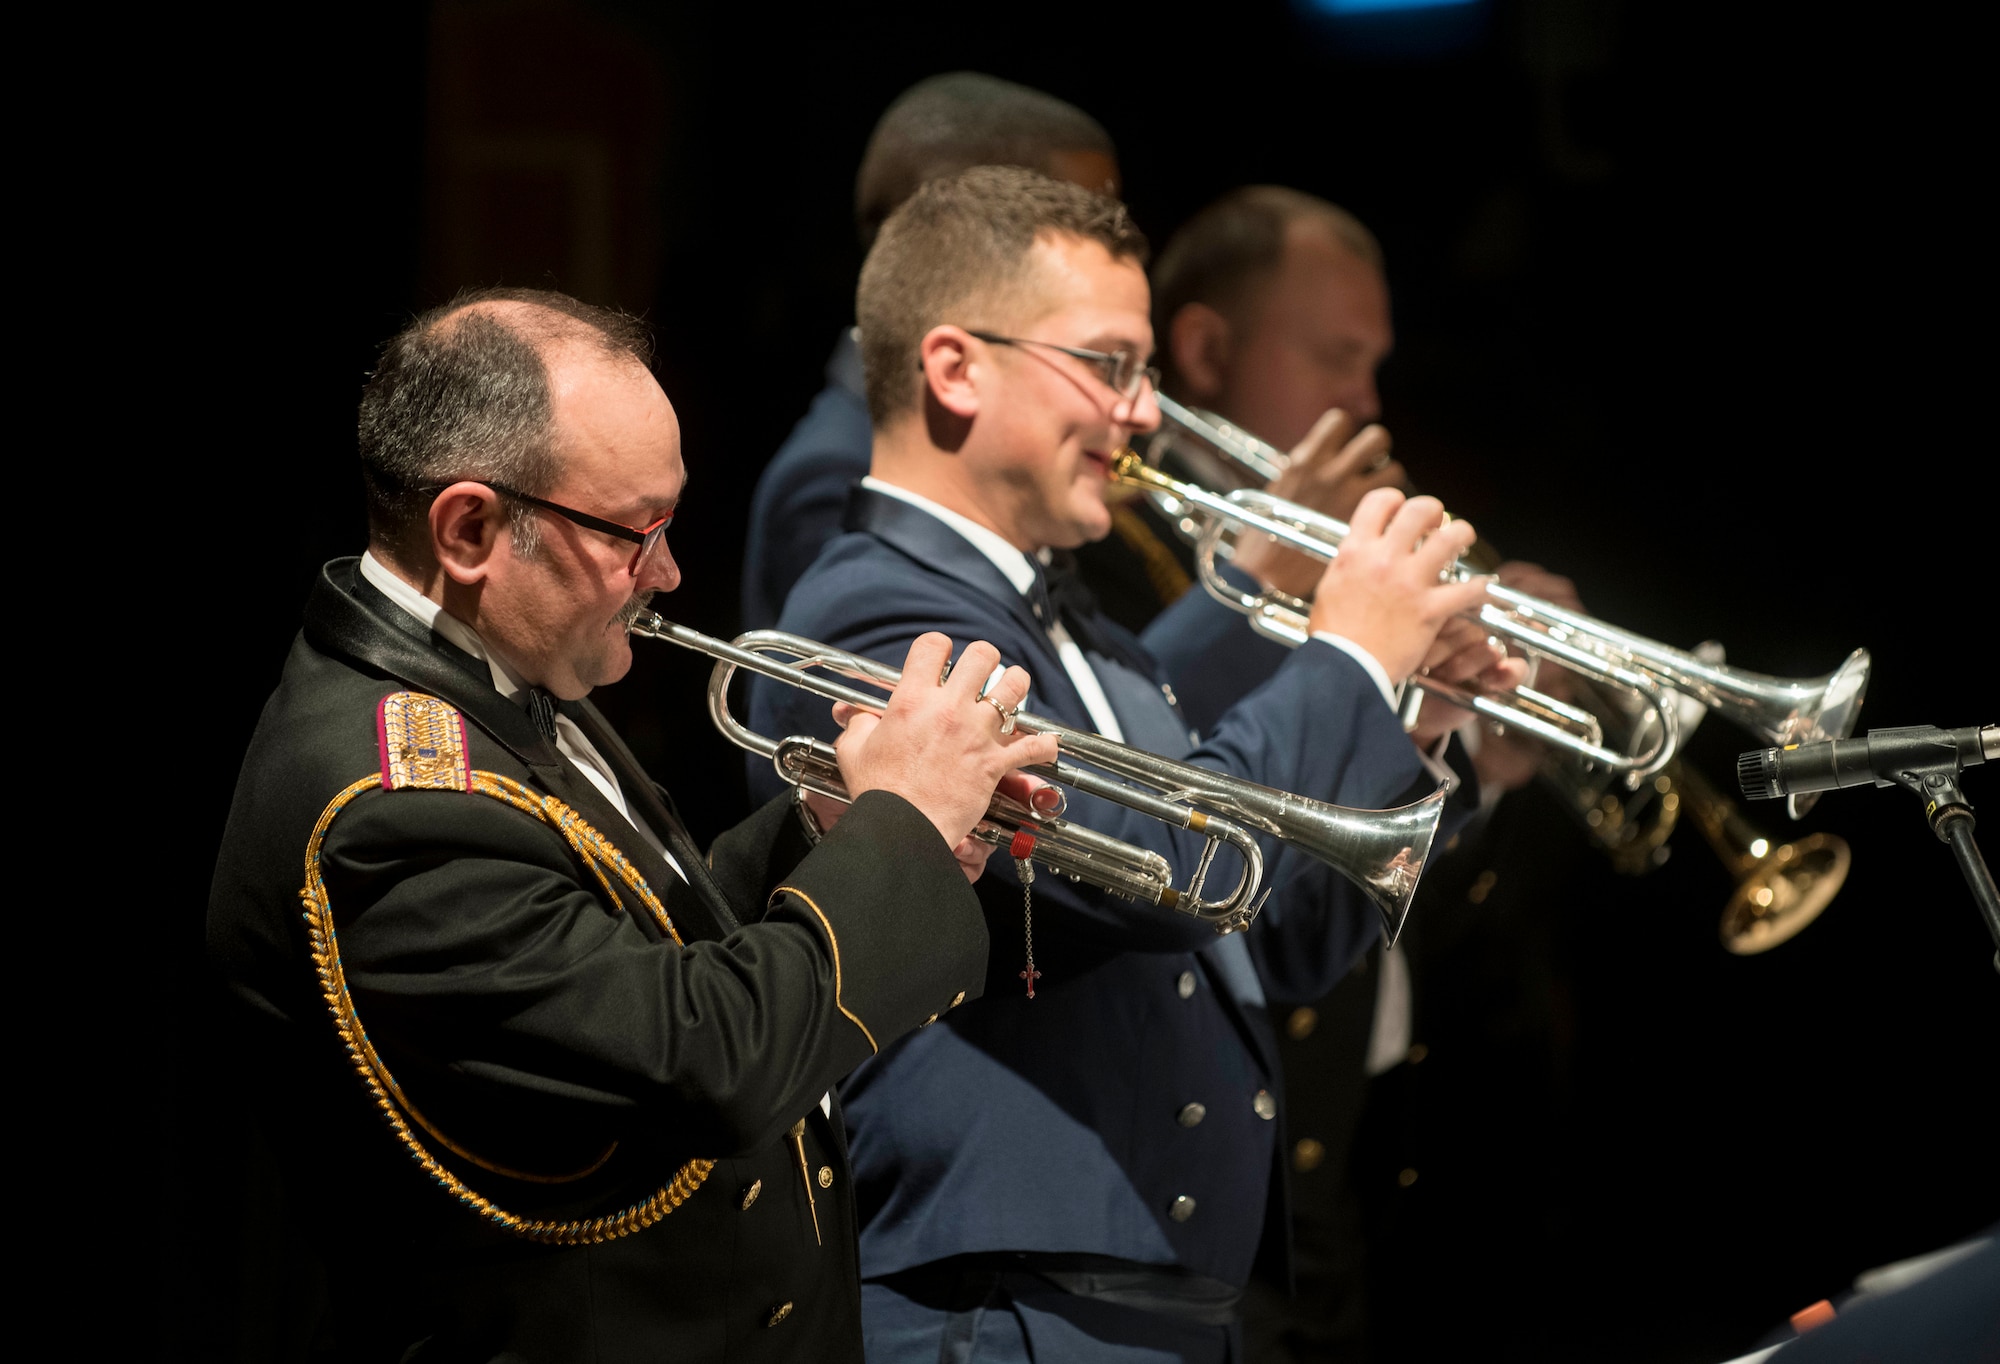 Dmytro Miedviediev, Ukrainian National Presidential Orchestra trumpeter, plays the trumpet alongside U.S. Air Force Staff Sgt. Nick DelVillano, U.S. Air Forces in Europe Ambassadors Jazz Band trumpeter, during a concert with the USAFE Band, L’viv Opera Chamber Orchestra and Ukrainian National Presidential Orchestra at the Lviv National Opera, Lviv, Ukraine, October 9, 2019. The USAFE Band traveled to six cities in central and western Ukraine October 6-20, 2019 to conduct the “Music of Freedom” tour, which celebrated the shared spirit of freedom and enduring partnership between U.S. and Ukrainian armed forces. (U.S. Air Force photo by Airman 1st Class Jennifer Zima)